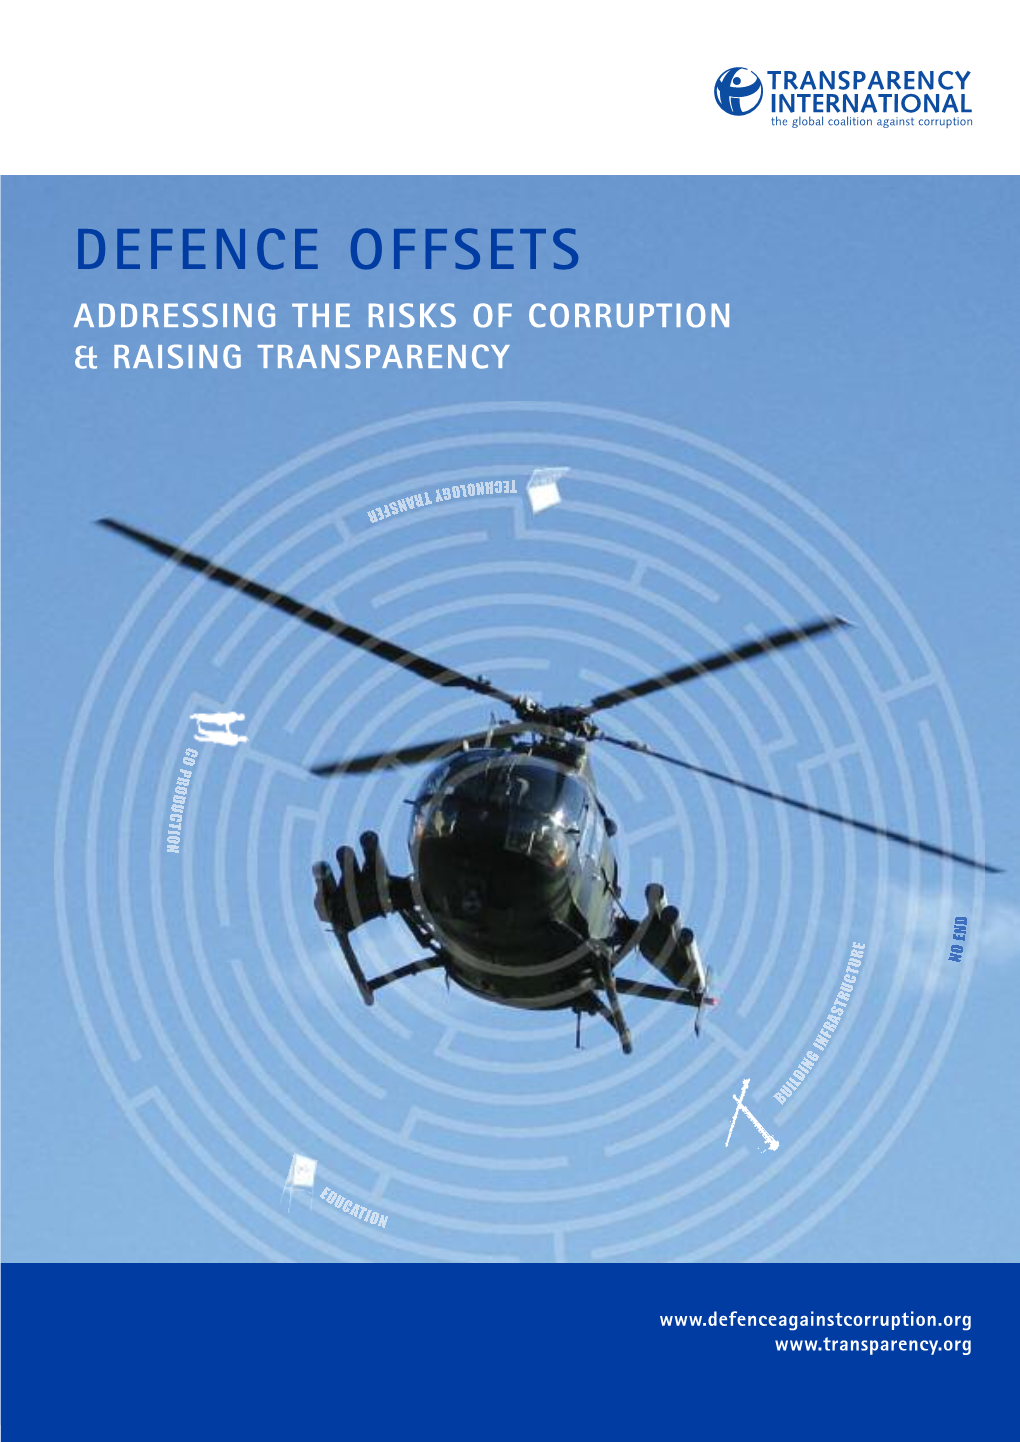 Defence Offsets Addressing the Risks of Corruption & Raising Transparency